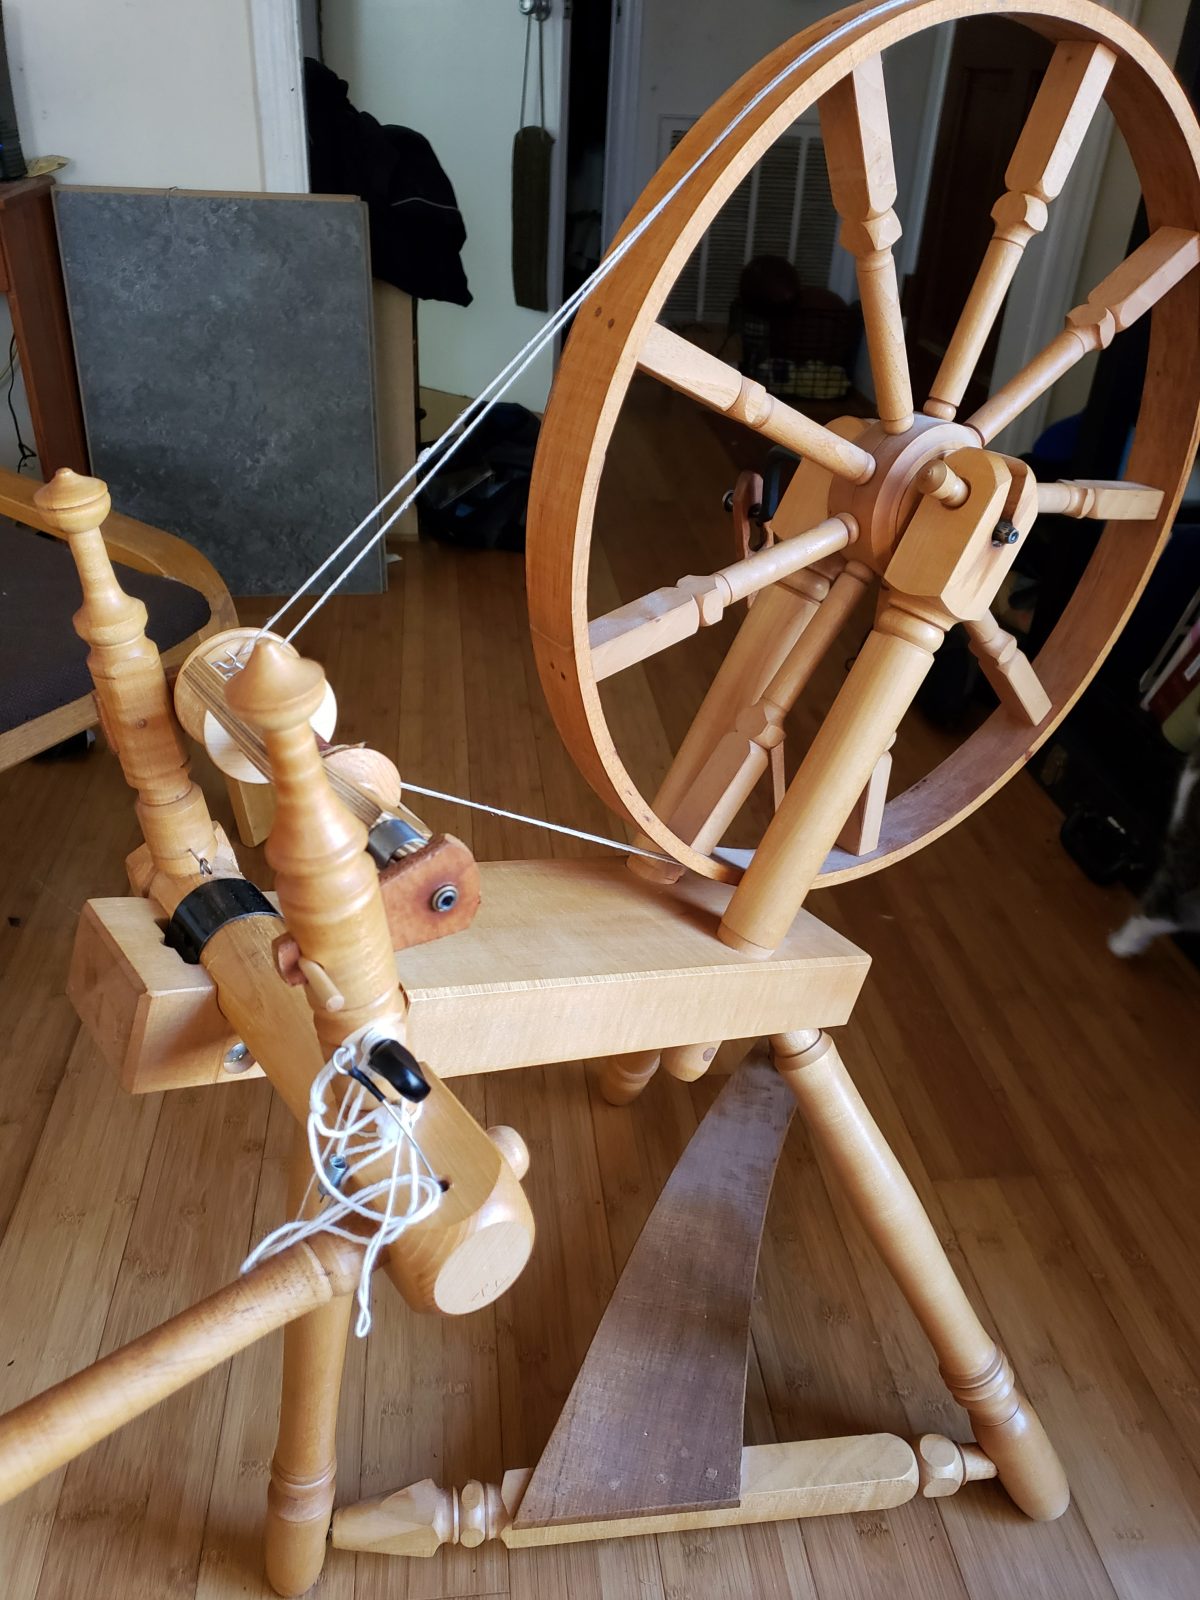 An Alden Amos flat-rim 'suitcase' spinning wheel set up with tilt-tension double drive.